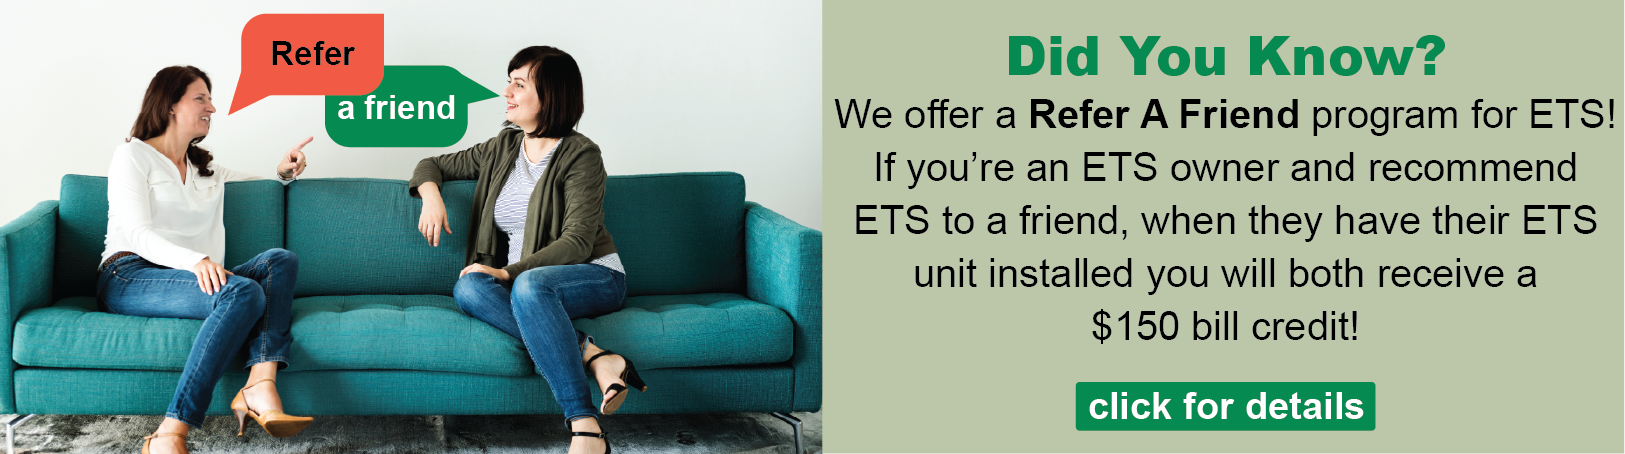 Image showing two women talking to weach other while sitting on a couch, with speech balloons tied to them saying "Refer" and "A Friend." Caption reads: "Did you know? We offer a Refer A Friend program for ETS! If you're an ETS owner and recommend ETS to a friend, when they have their ETS unit installed you will both receive a $150 bill credit! Click for details."